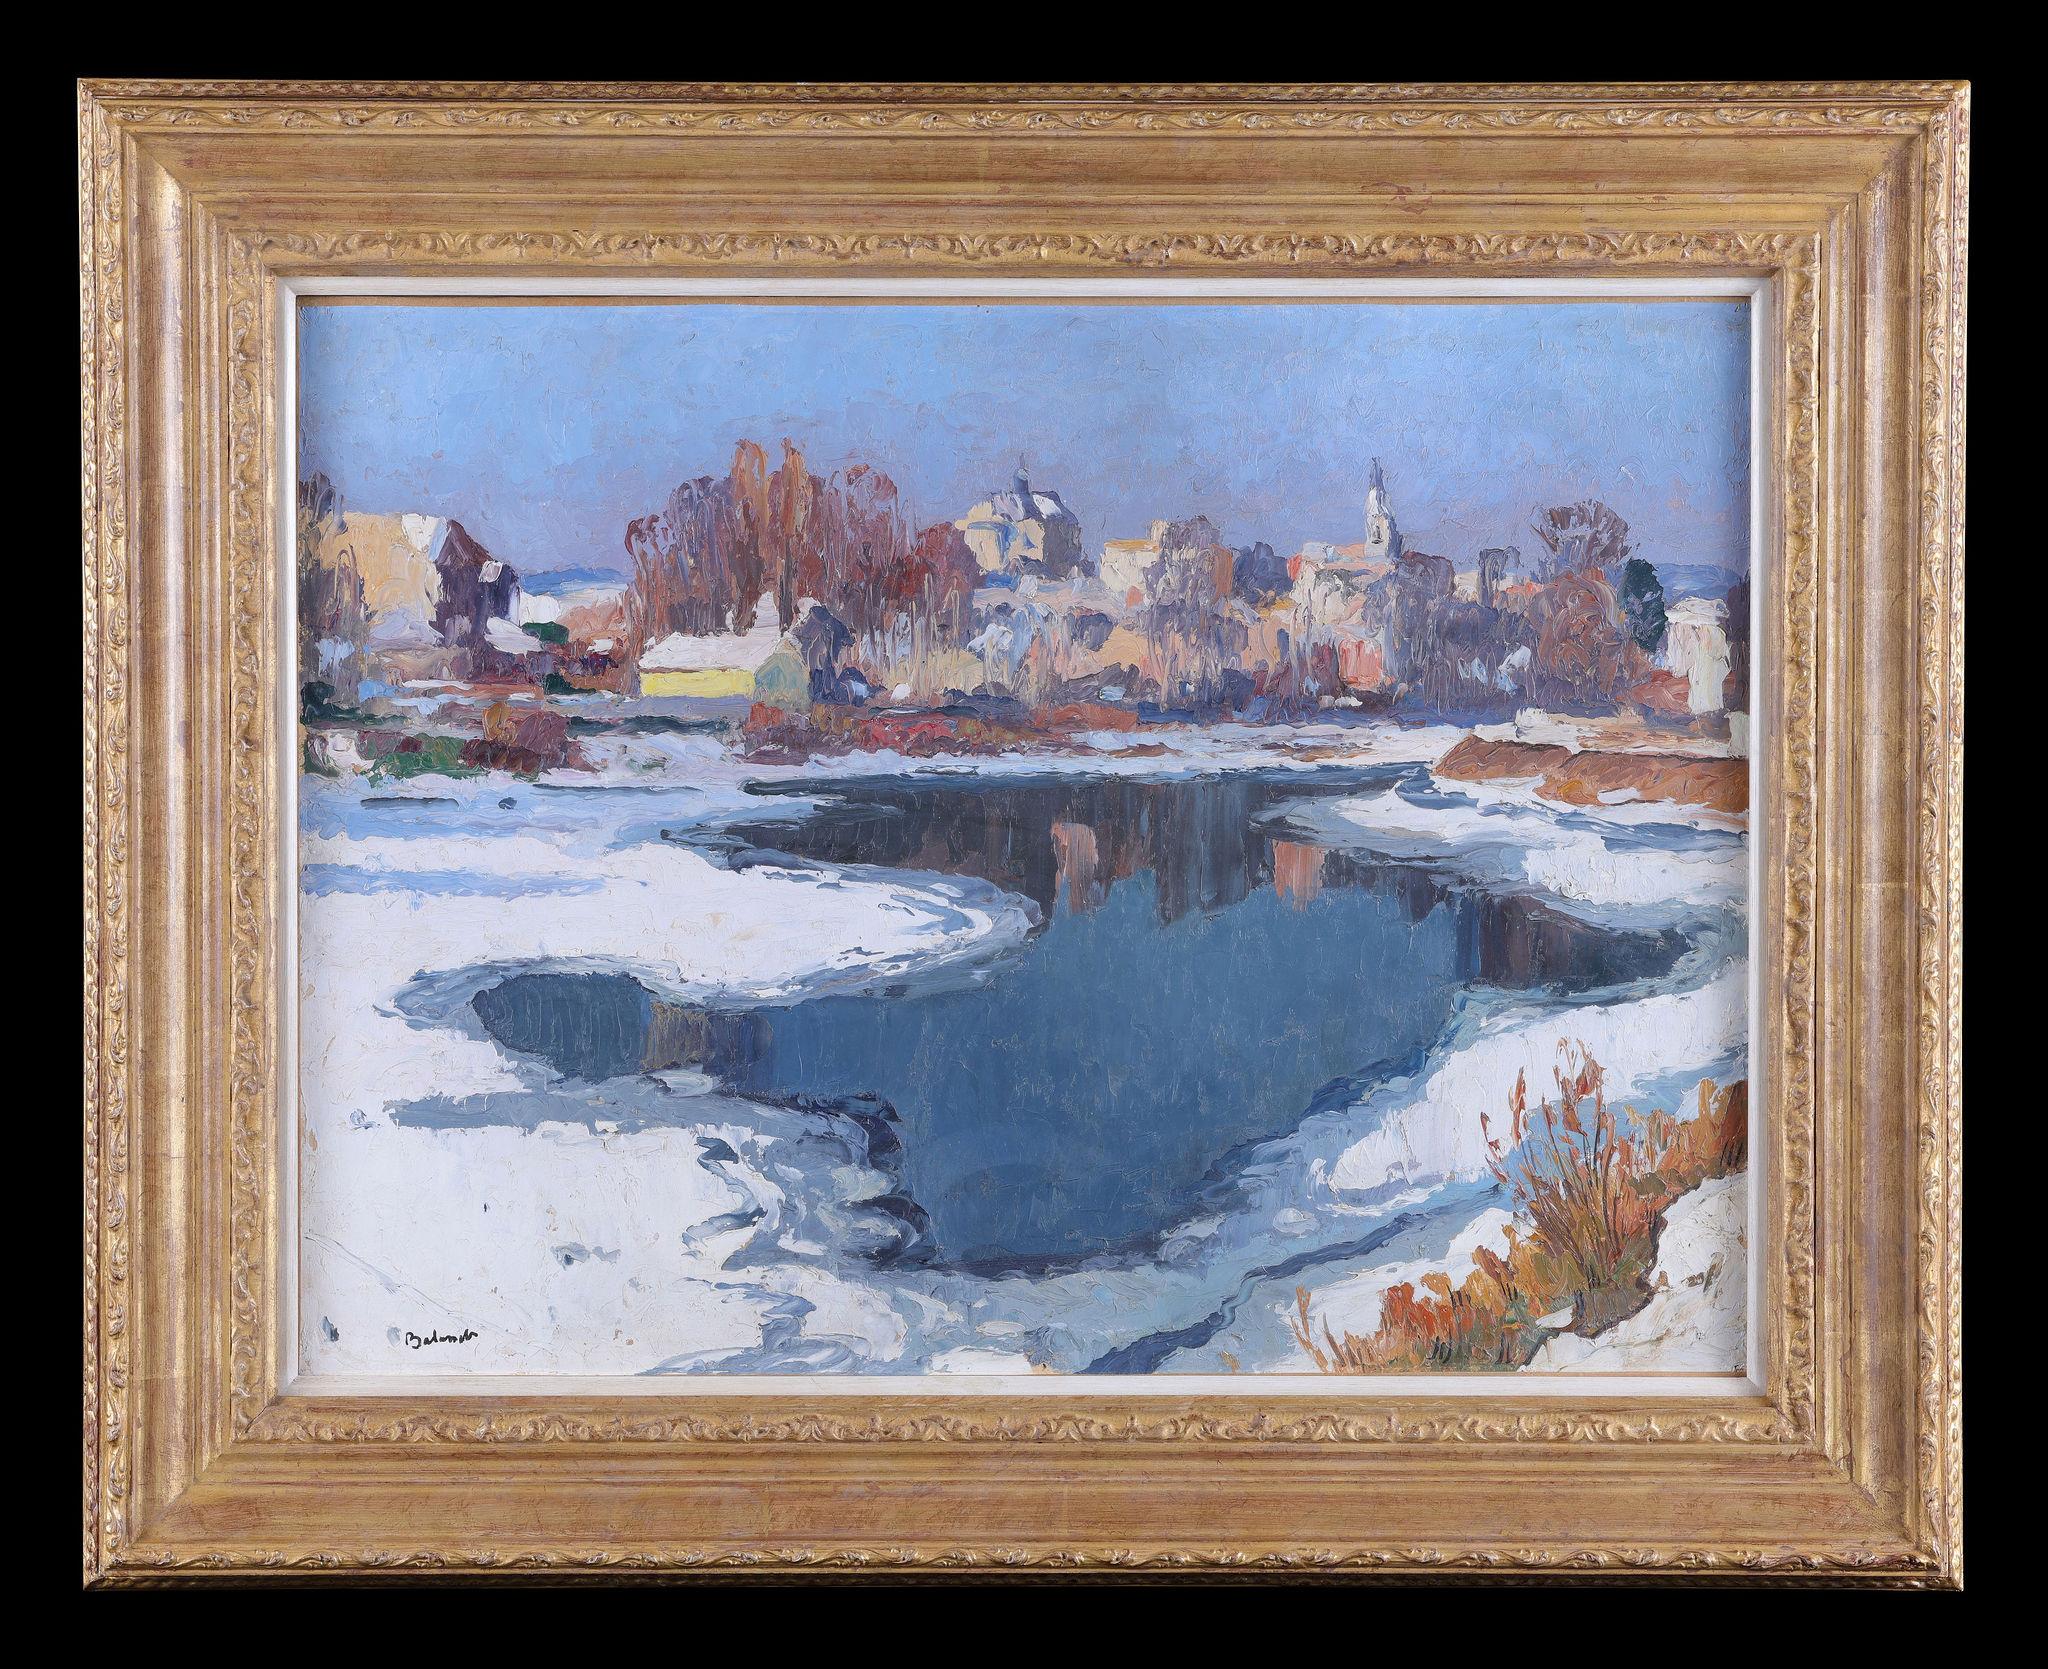 A Winter River Scene - Painting by Gaston Balande